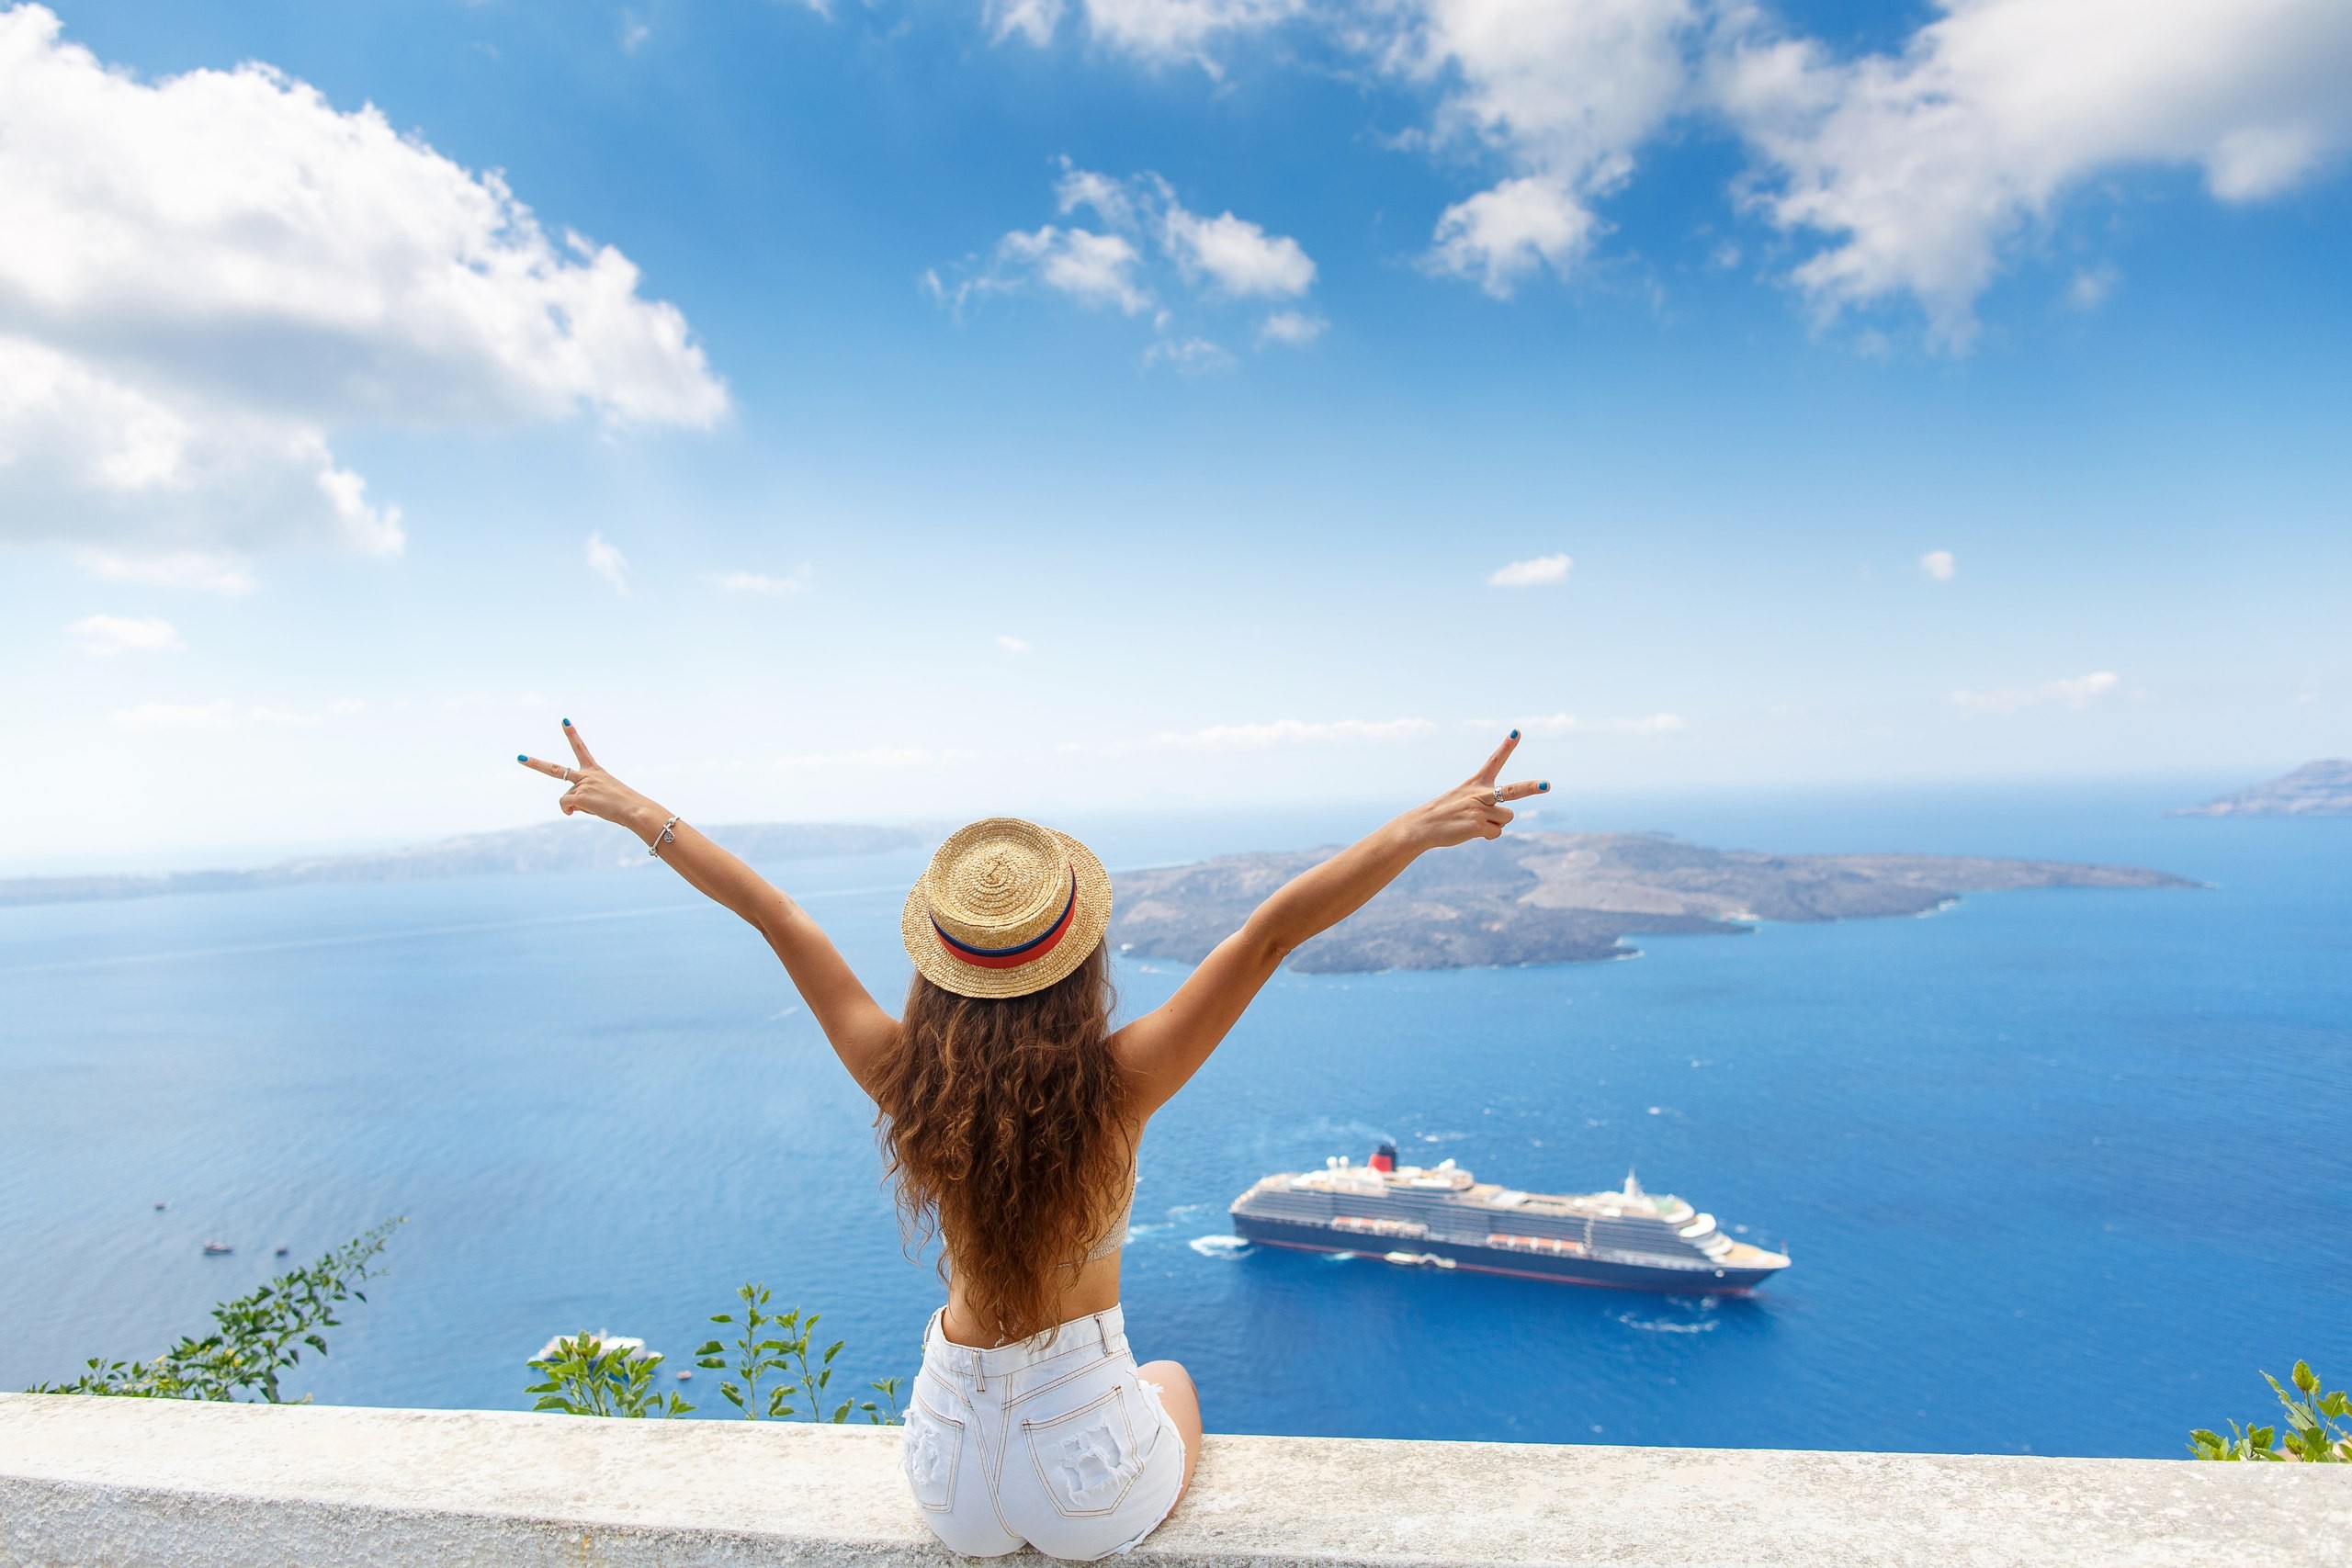 People 2560x1707 women sitting jean shorts arms up sea back hat sky clouds bikini top island painted nails depth of field ass cruise ship